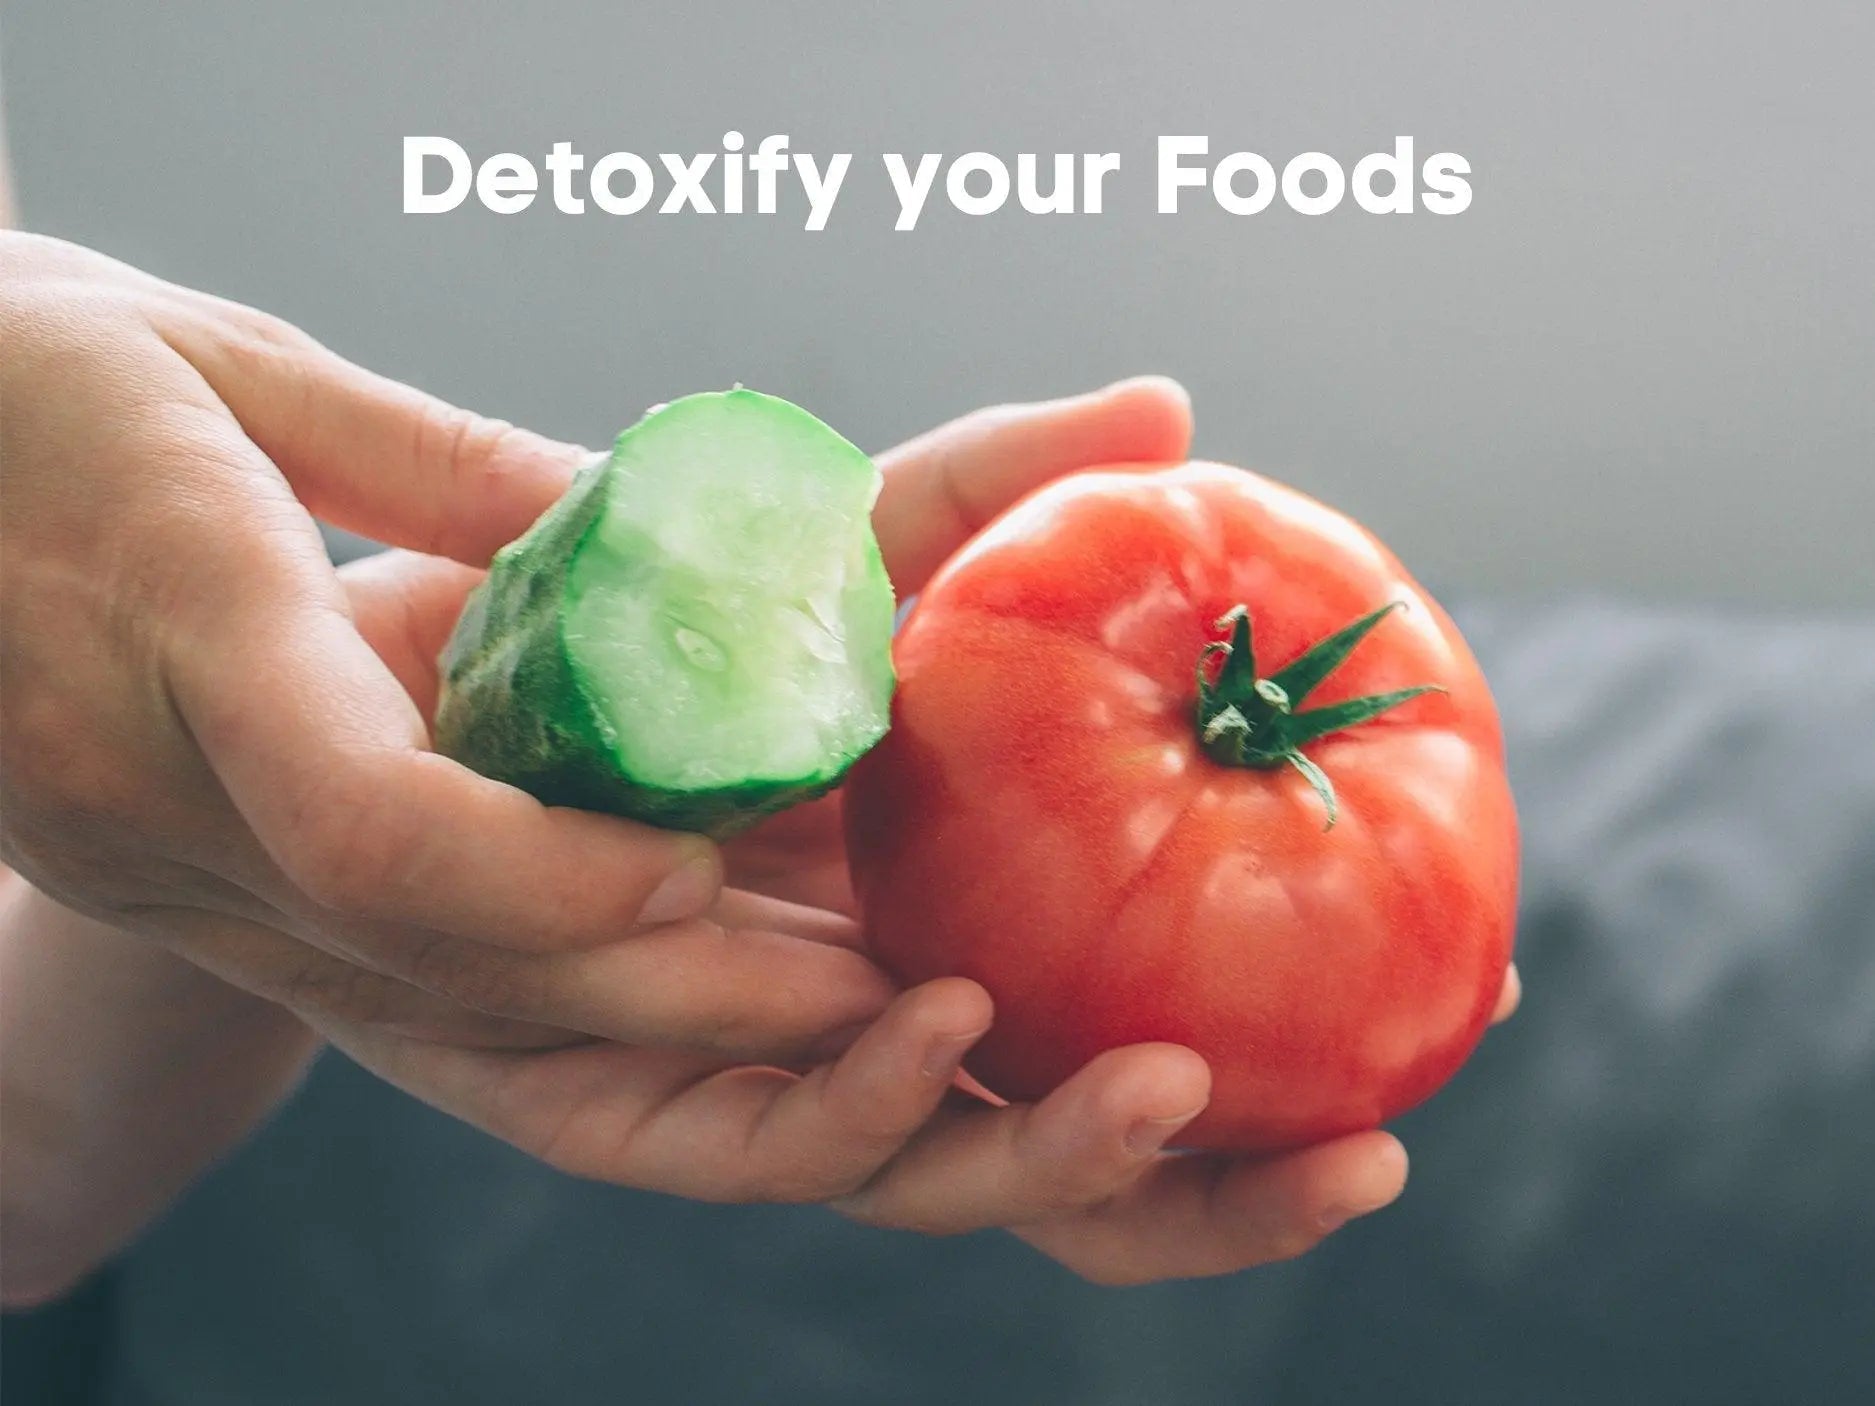 Detoxify your Foods - Pitcher of Life